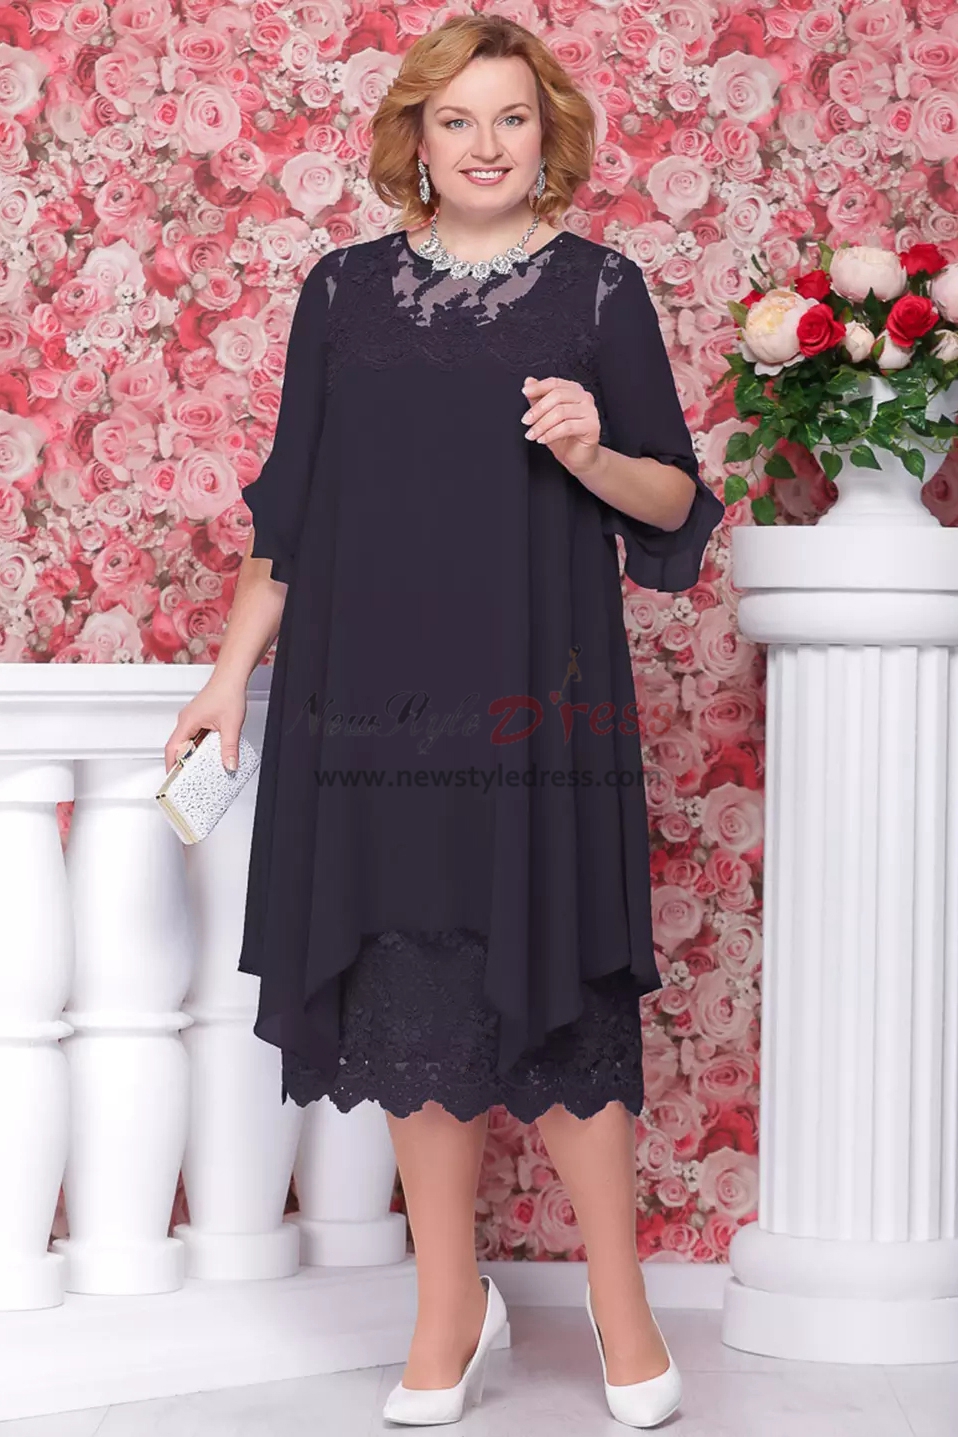 Plus size Royal blue Comfortable Chiffon Mother of the bride dresses ...